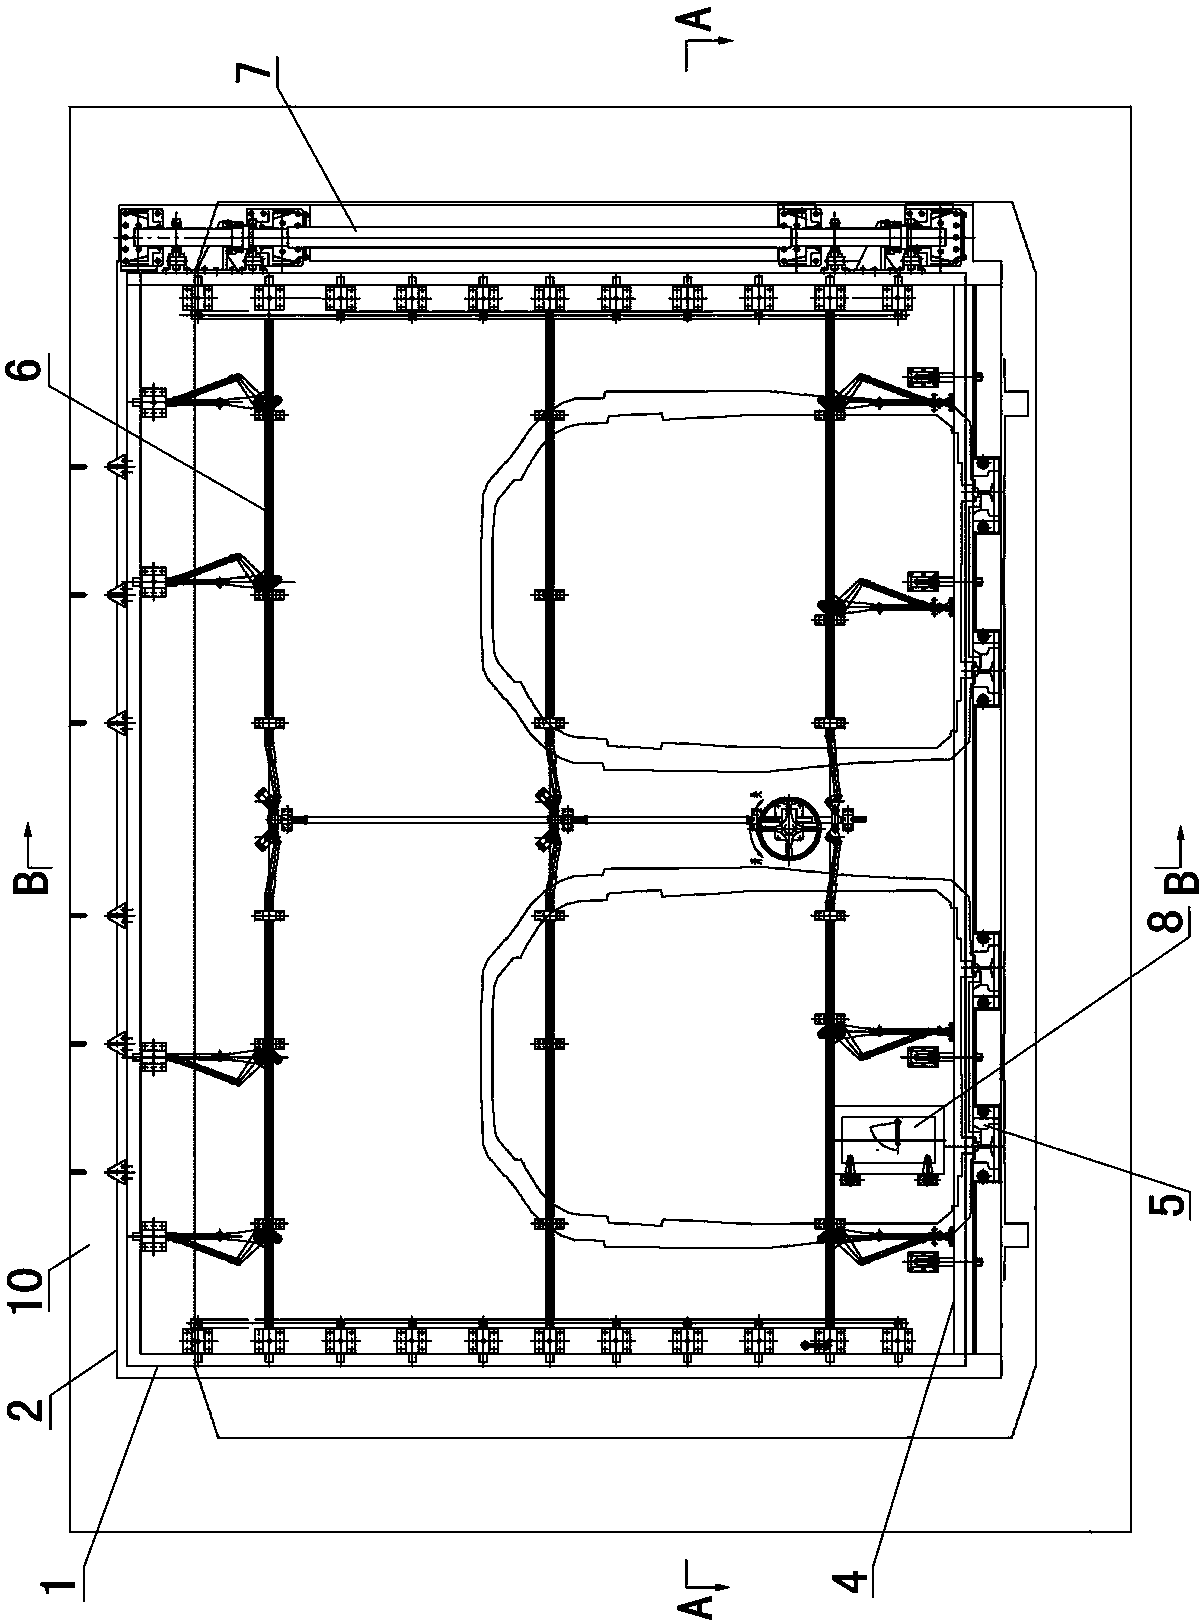 Oversized single-leaf protection airtight separation door for single-tunnel double-line section of metro